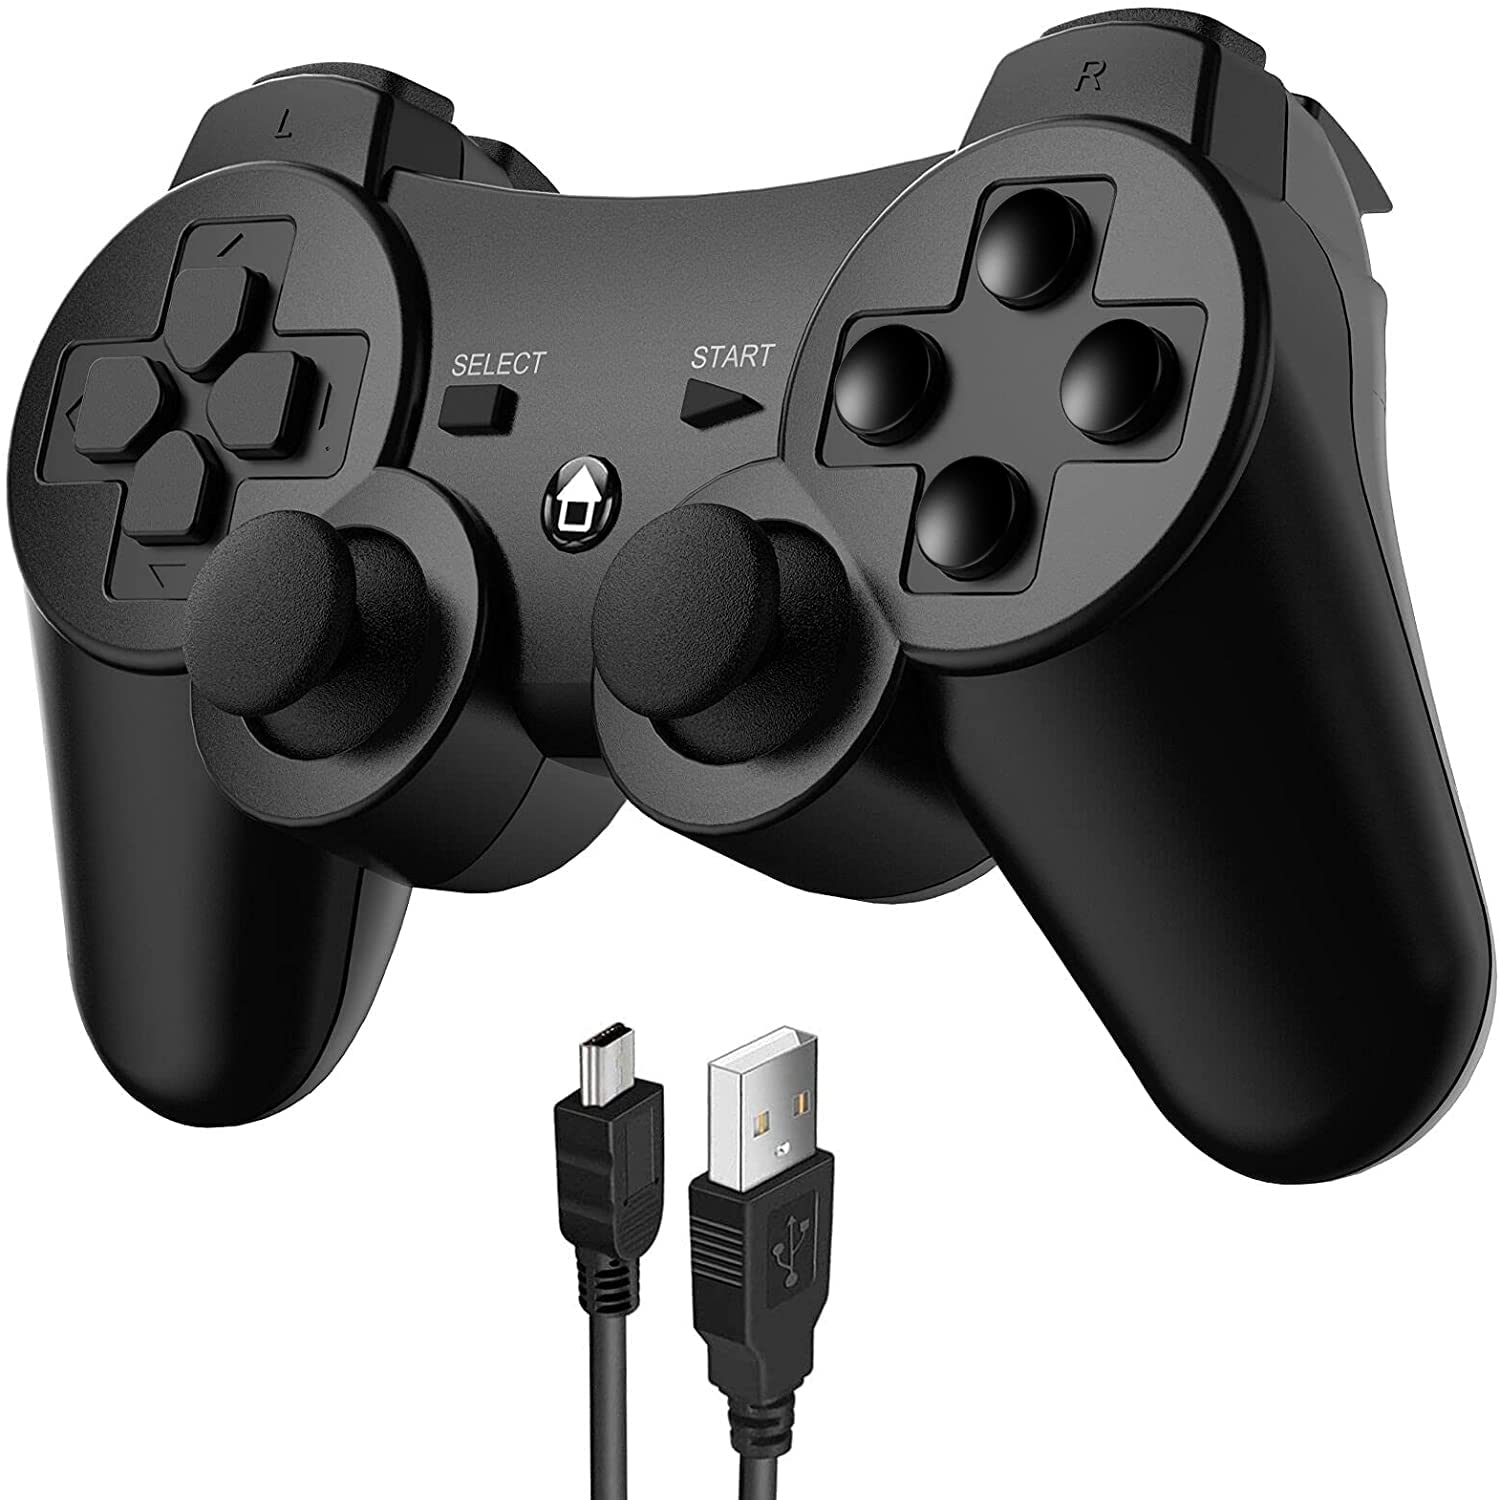 JAMSWALL Controller for PS3, Wireless Bluetooth Controller Gamepad Joystick, Double Vibrating Controller for Sony Playstation 3 with Charger Cable Cord Thump Grips